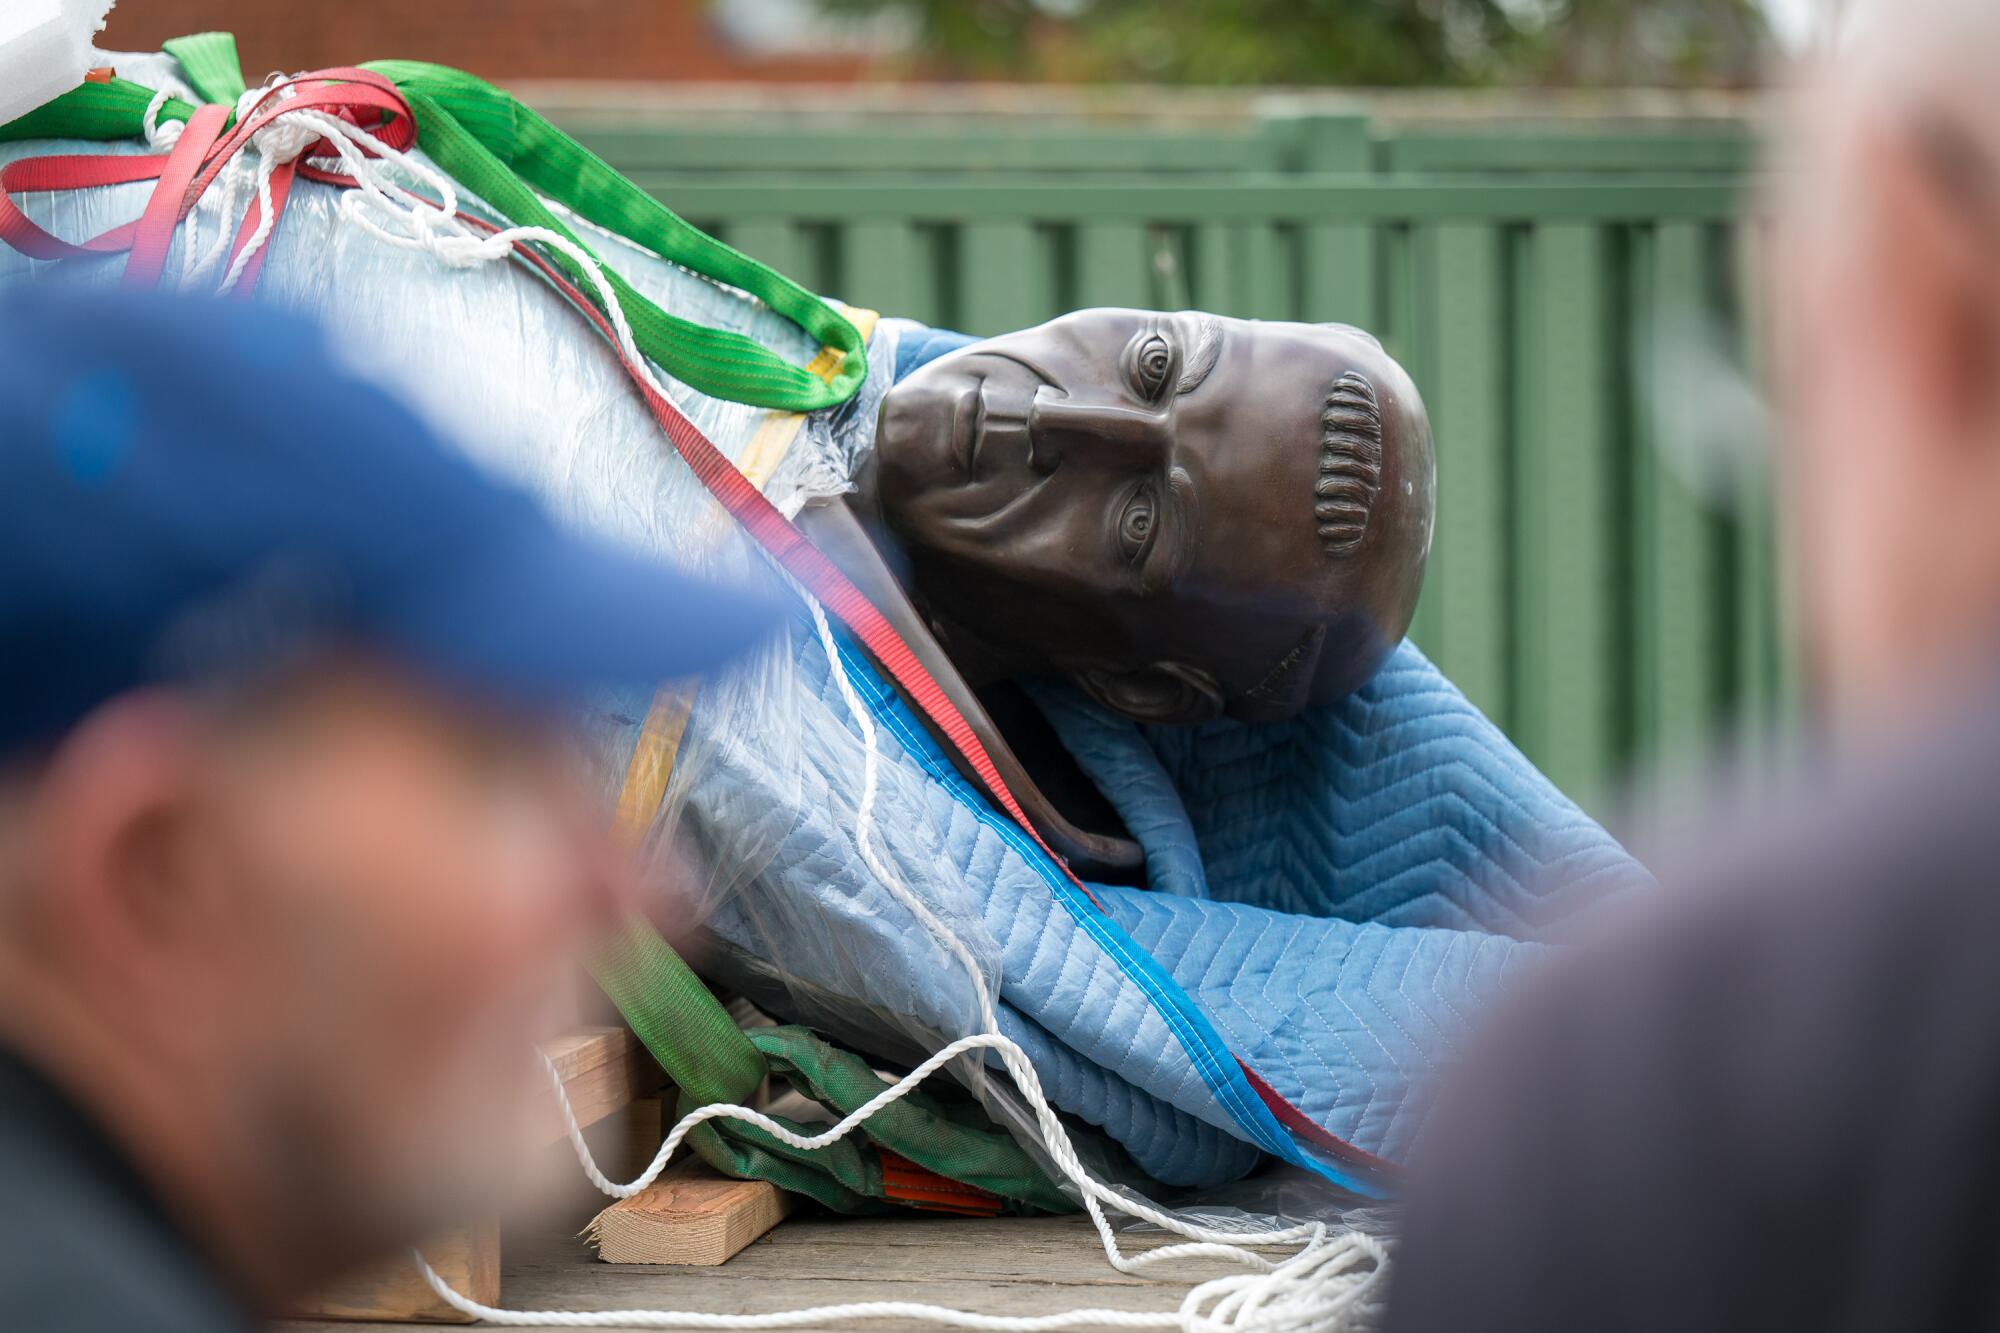 The face of a bronze statue of Junípero Serra emerges from moving blankets and other materials used for its relocation.